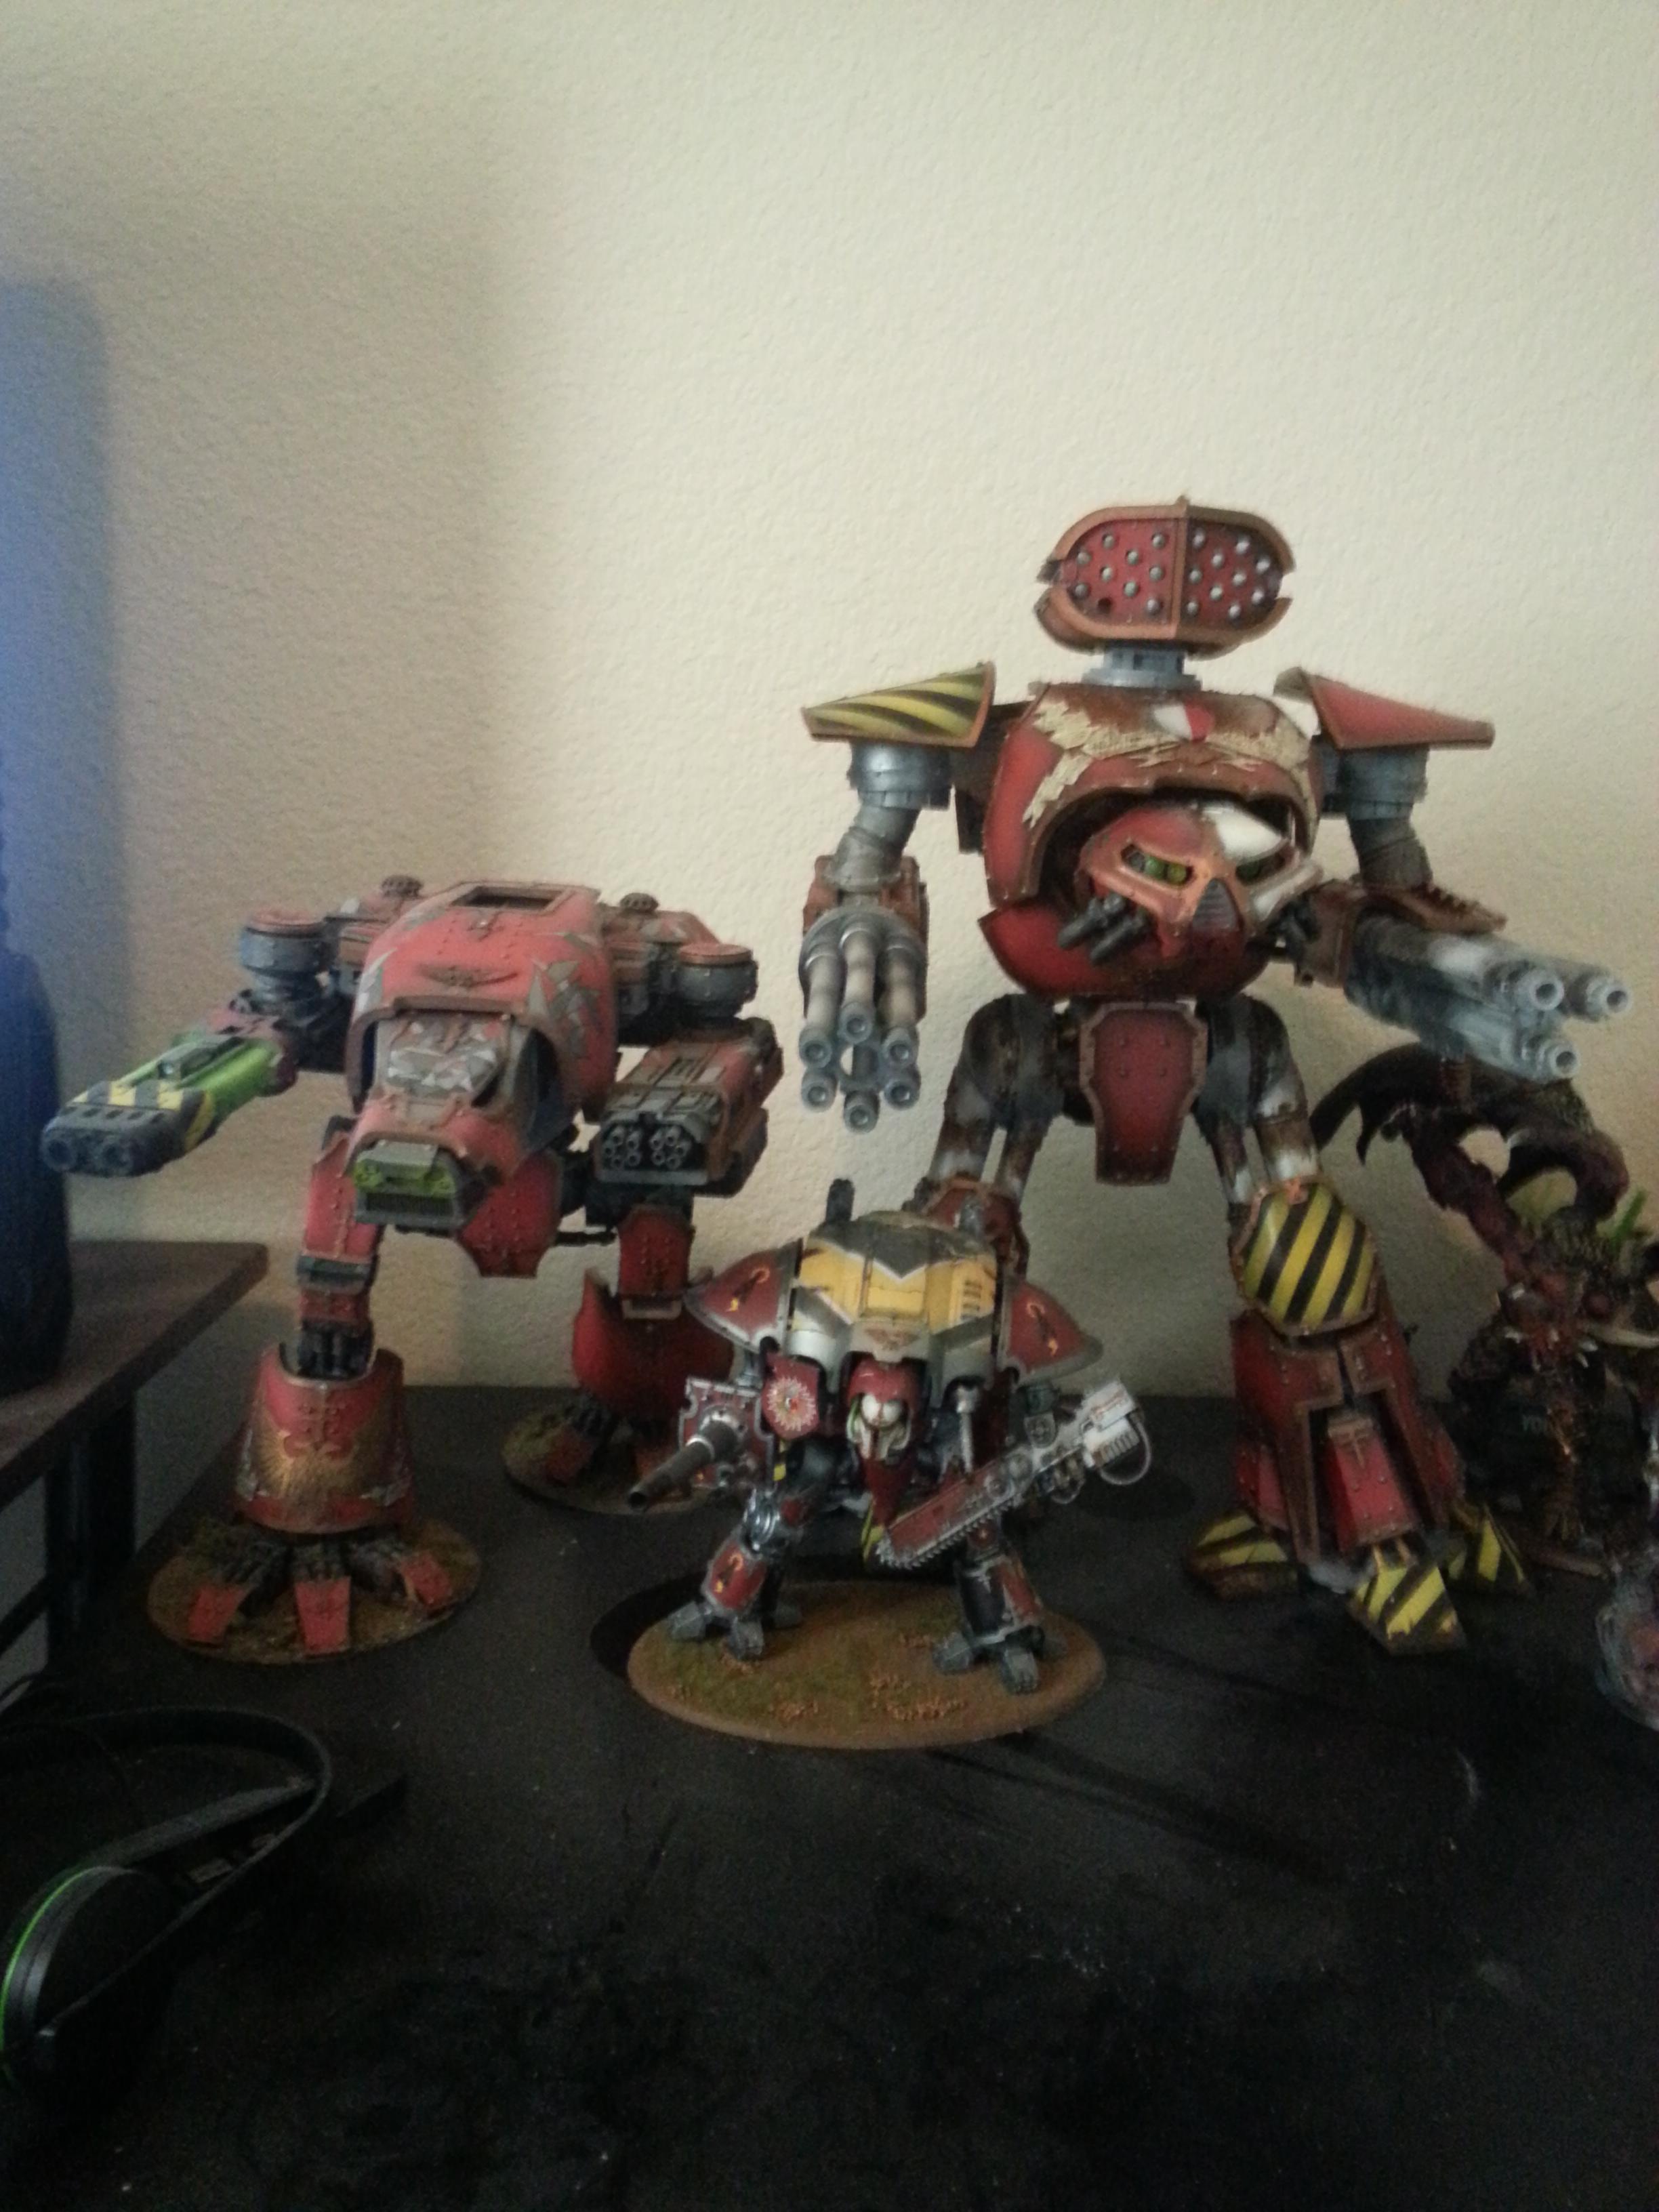 Comparison with Warhound and Knight